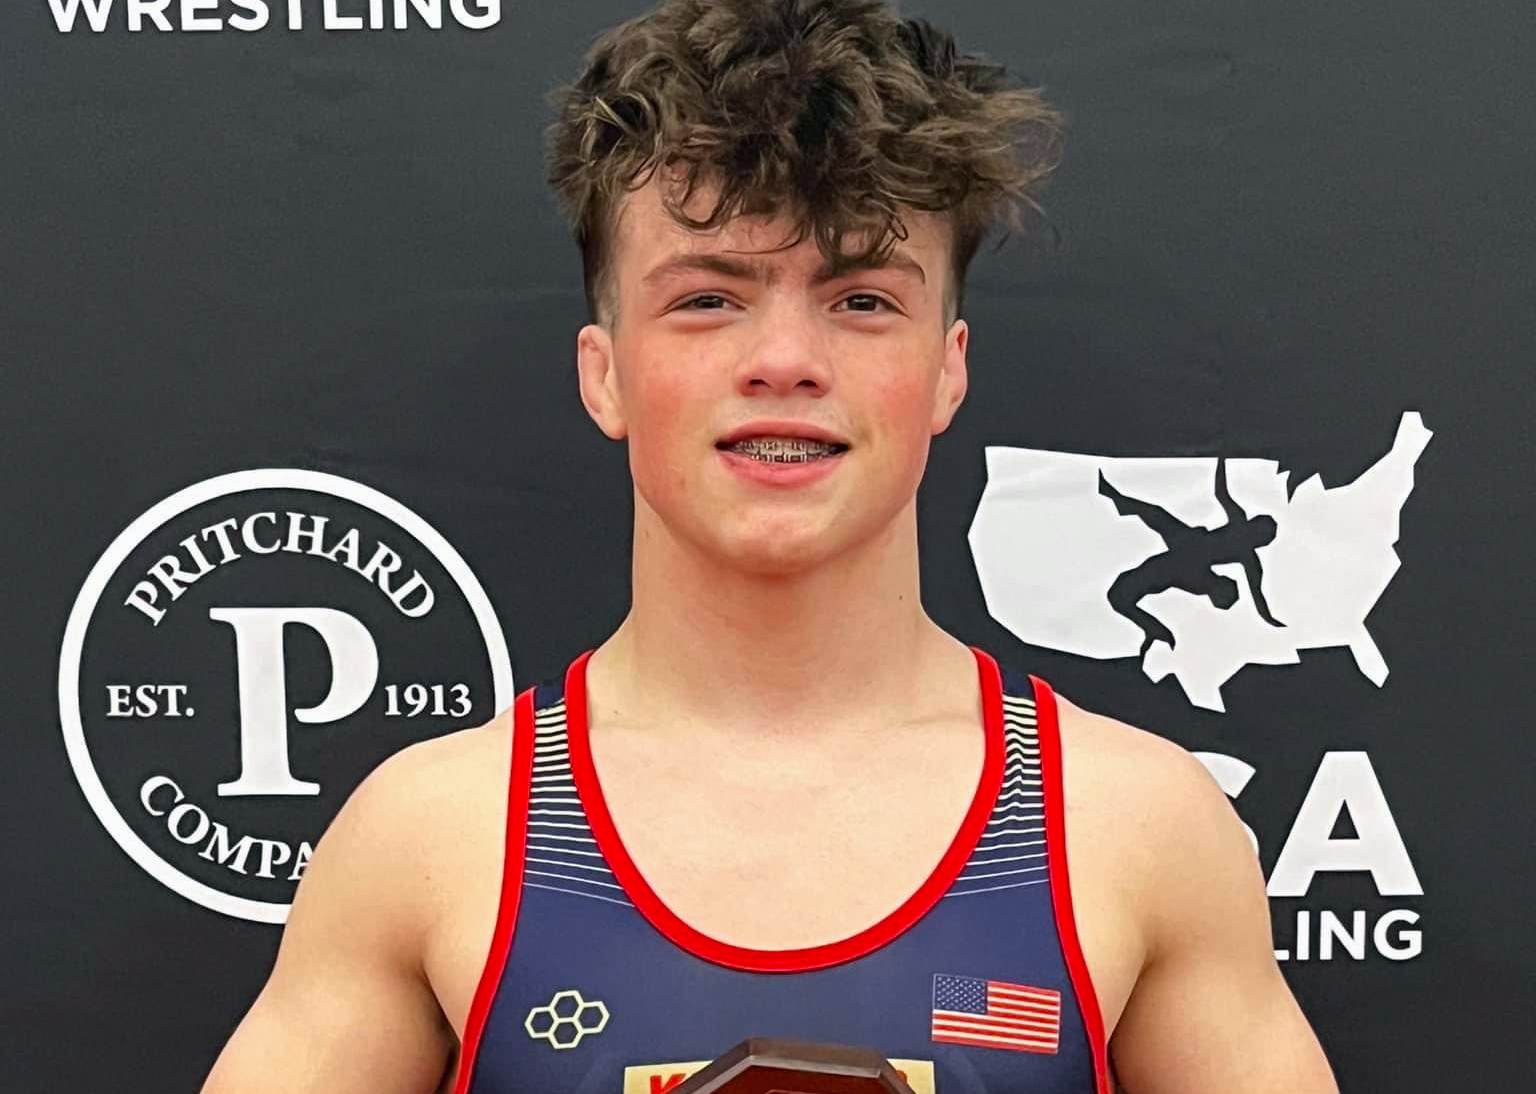 At PowerAde Norwin's Landon Sidun captured his first major high school wrestling title. He went on to finish the season with a 38-2 record and a Pennsylvania state title, as well as well as the No. 1 ranking in the final 2023-24 SBLive 113-pound national rankings.